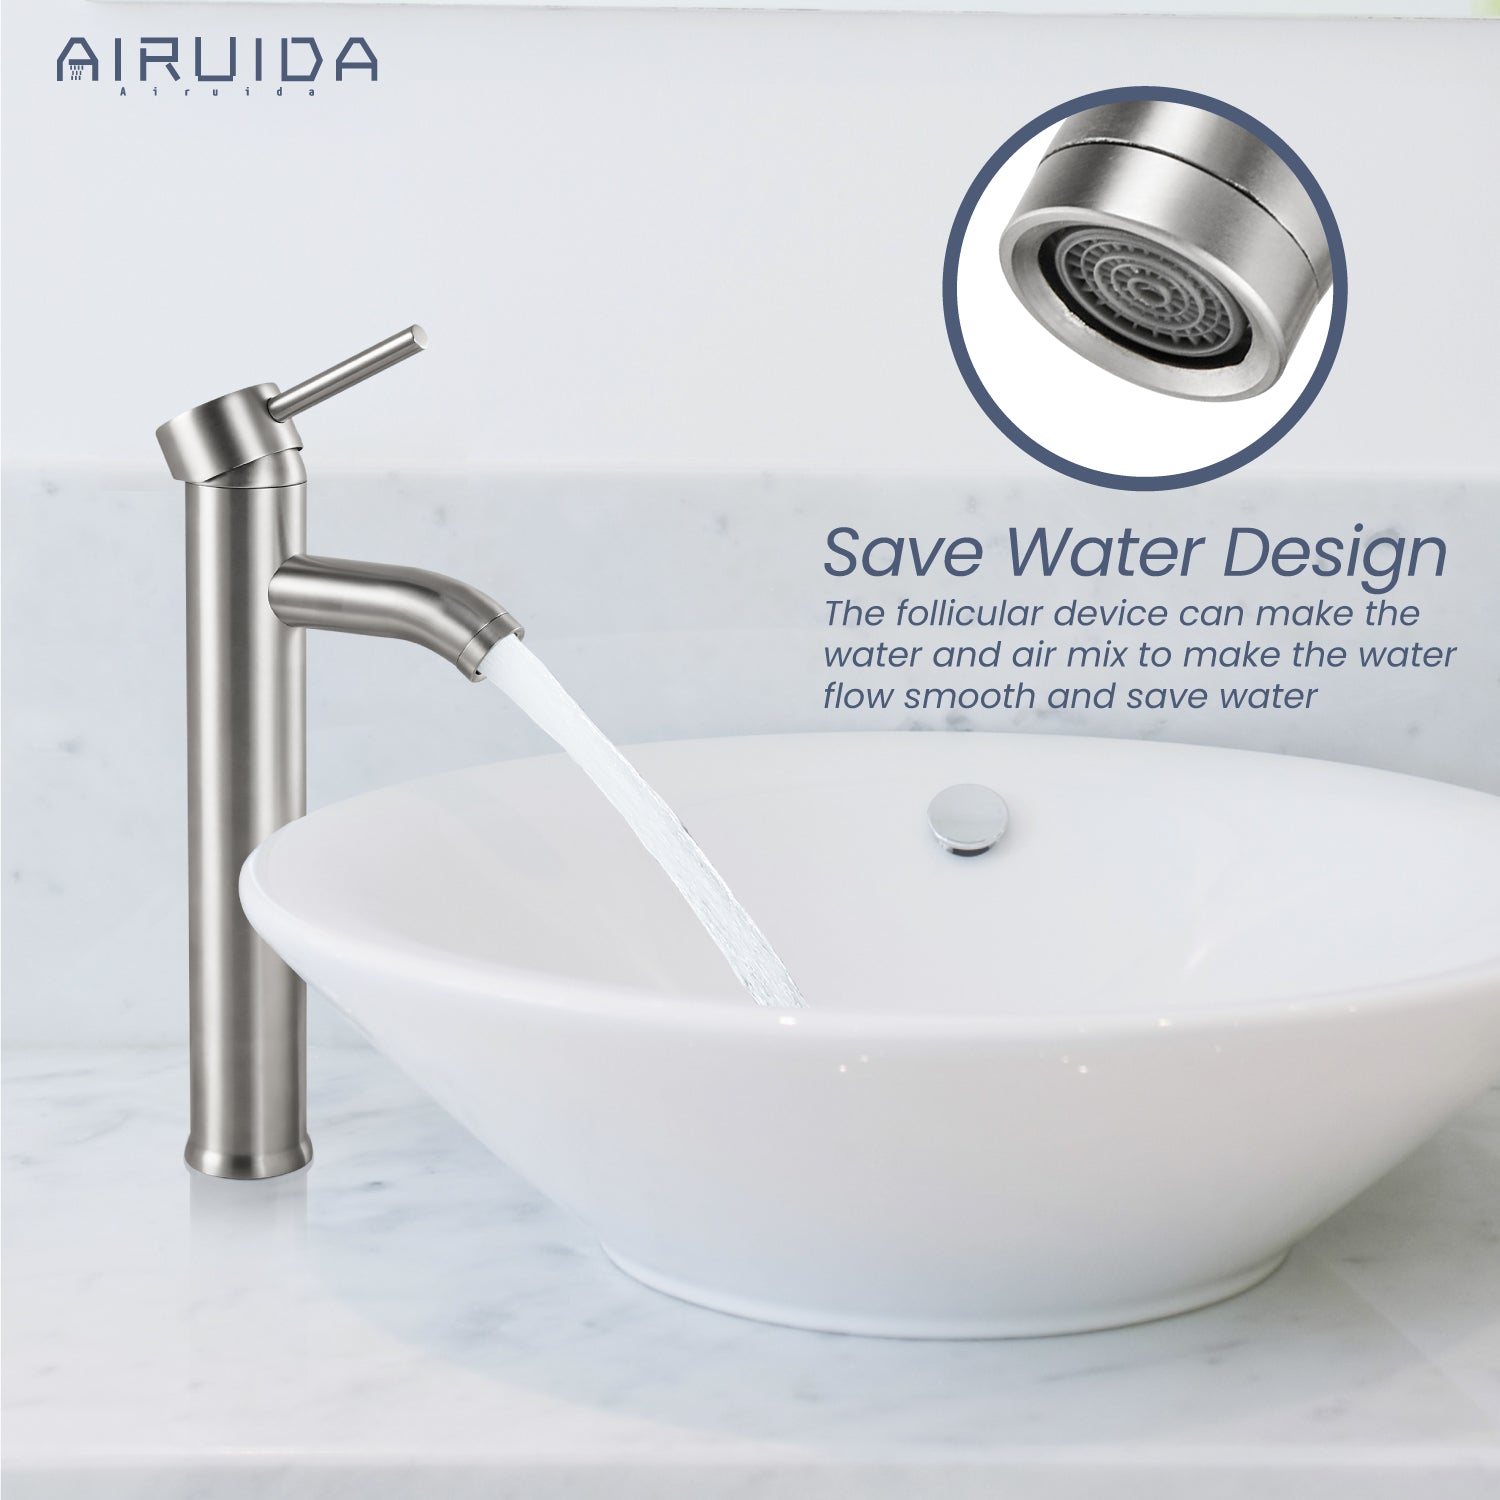 Airuida Single Hole Bathroom Bowl Vanity Faucets Single Handle Tall Bathroom Mixer Tap Stainless Steel Deck Mount with Circular Spout Bowl Vessel Sink Faucet